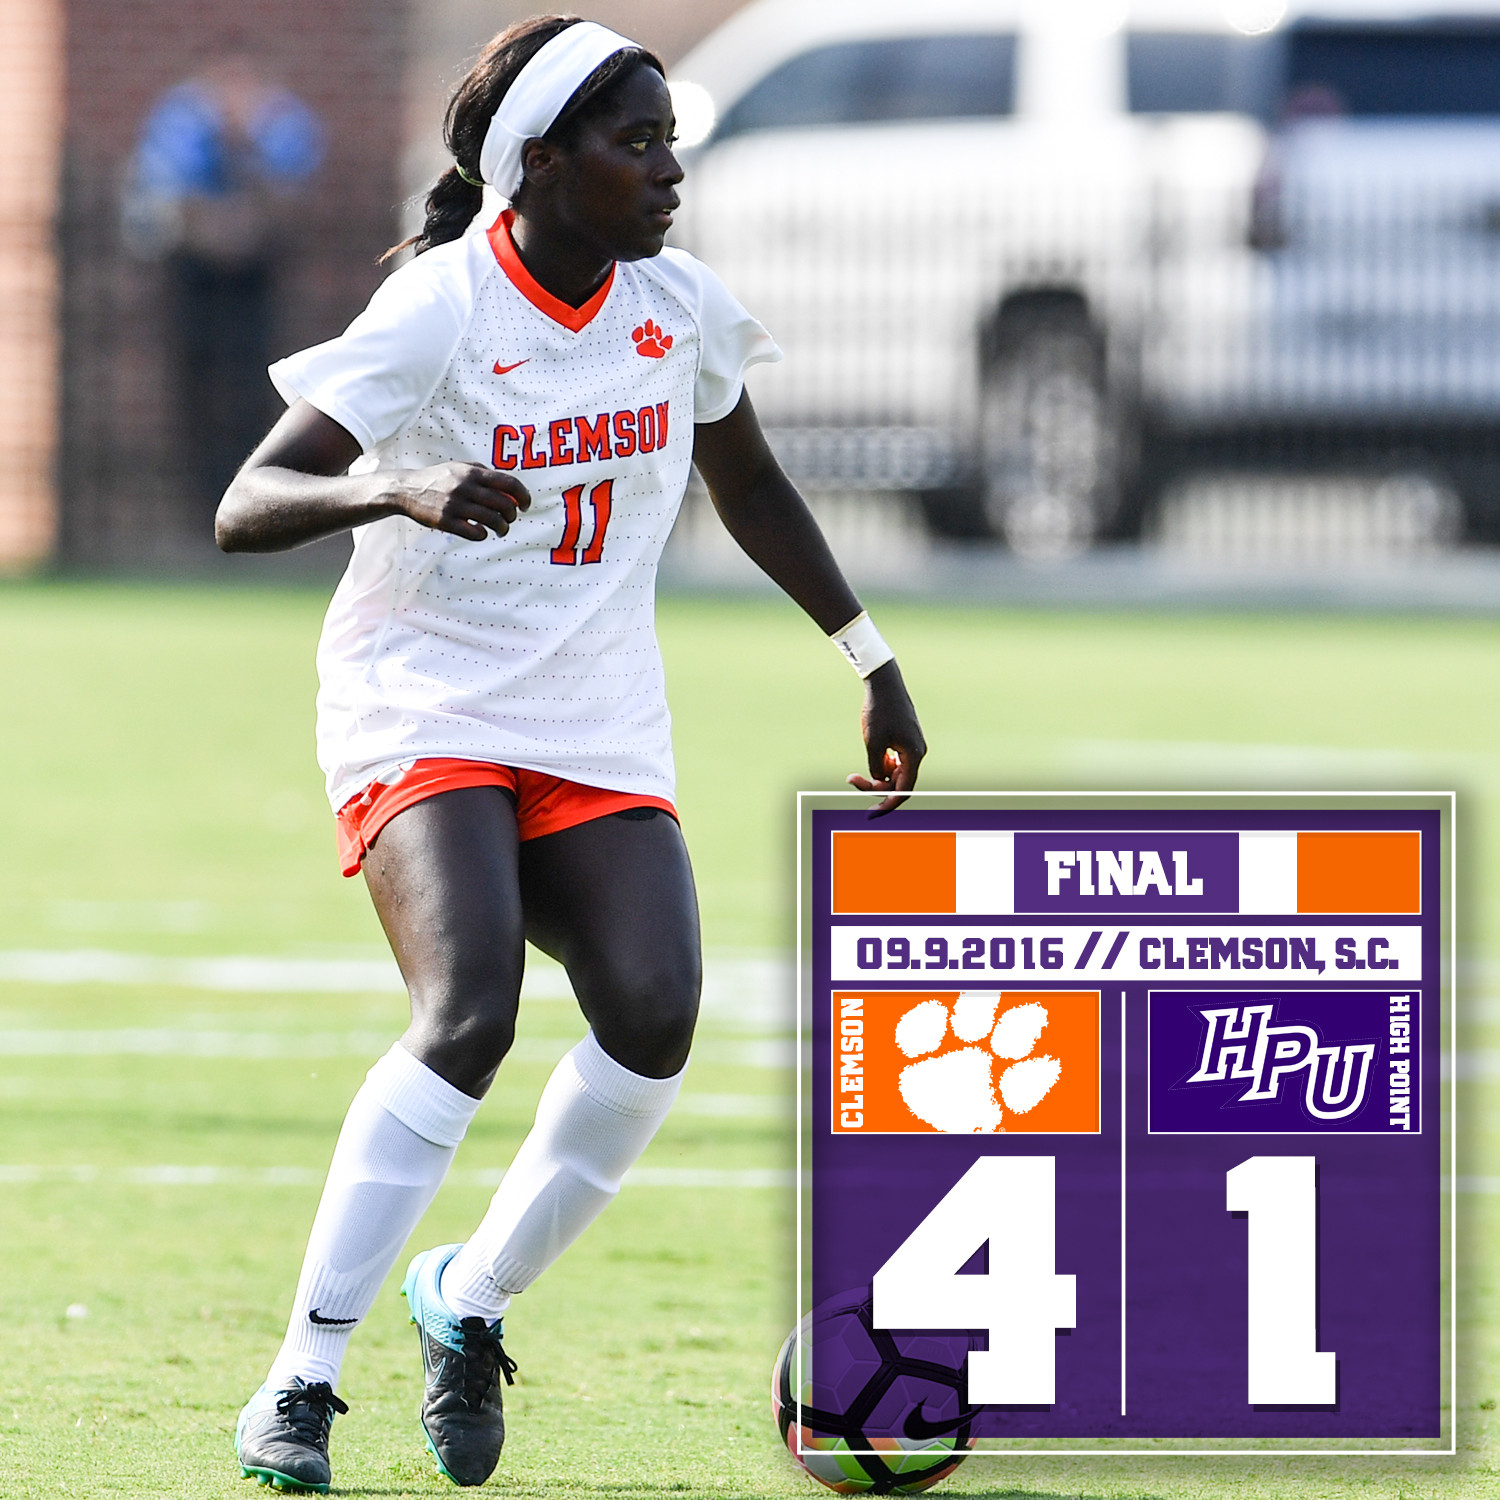 #13 Tigers? Offense Too Much for High Point in 4-1 Victory